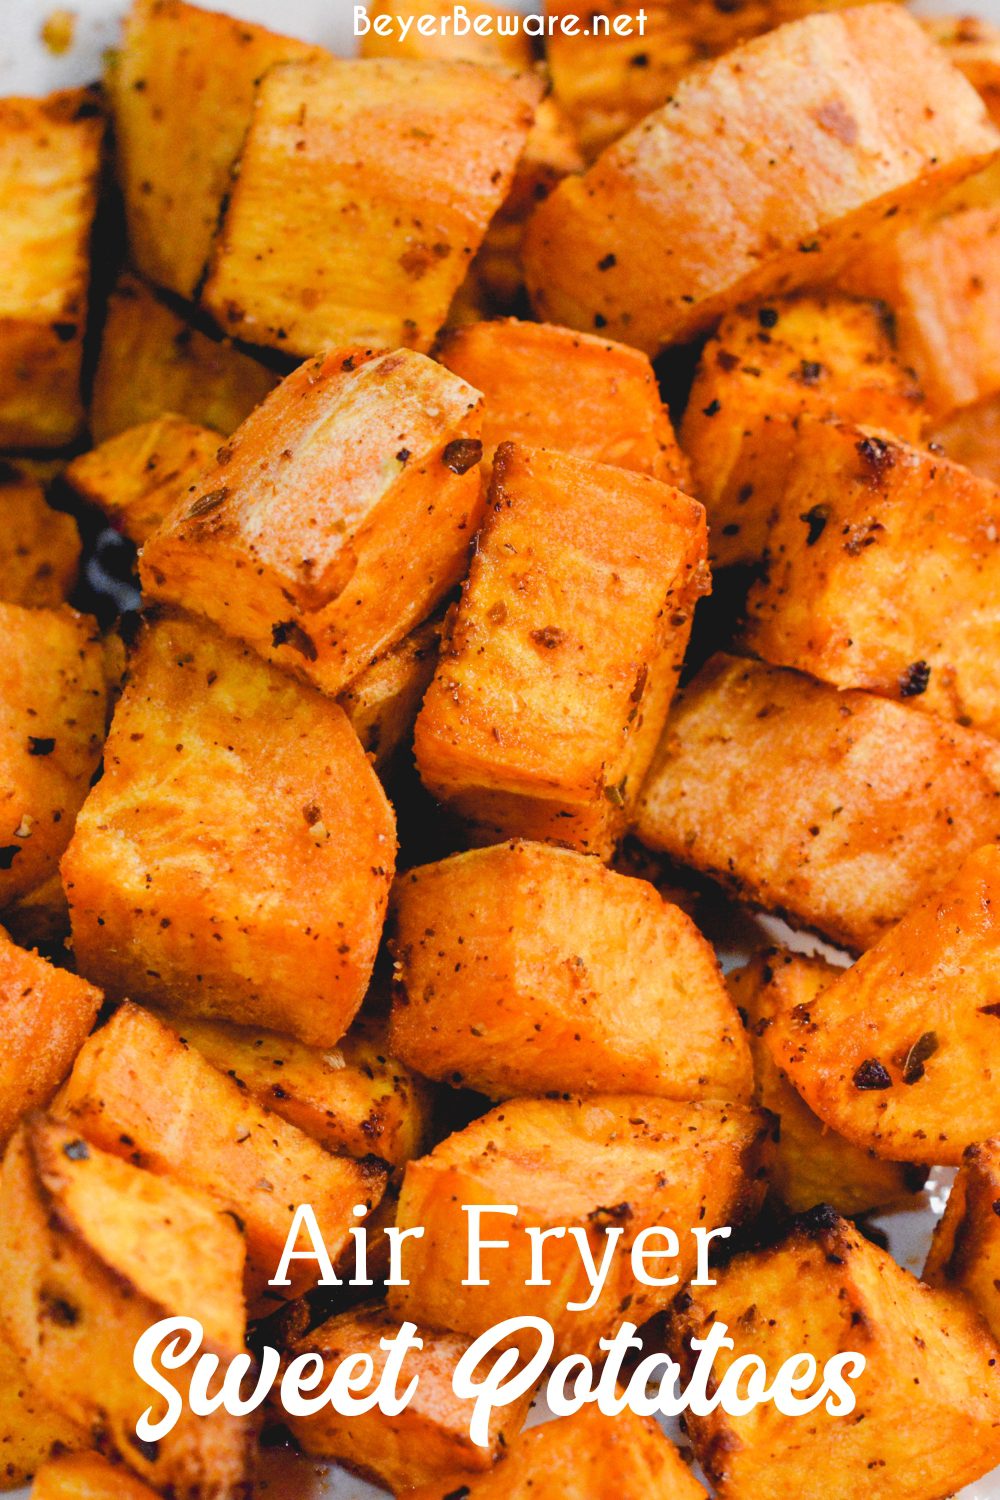 Air Fryer Sweet Potatoes are an easy cubed sweet potatoes in the air fryer made in under 15 minutes for a quick and easy side dish.